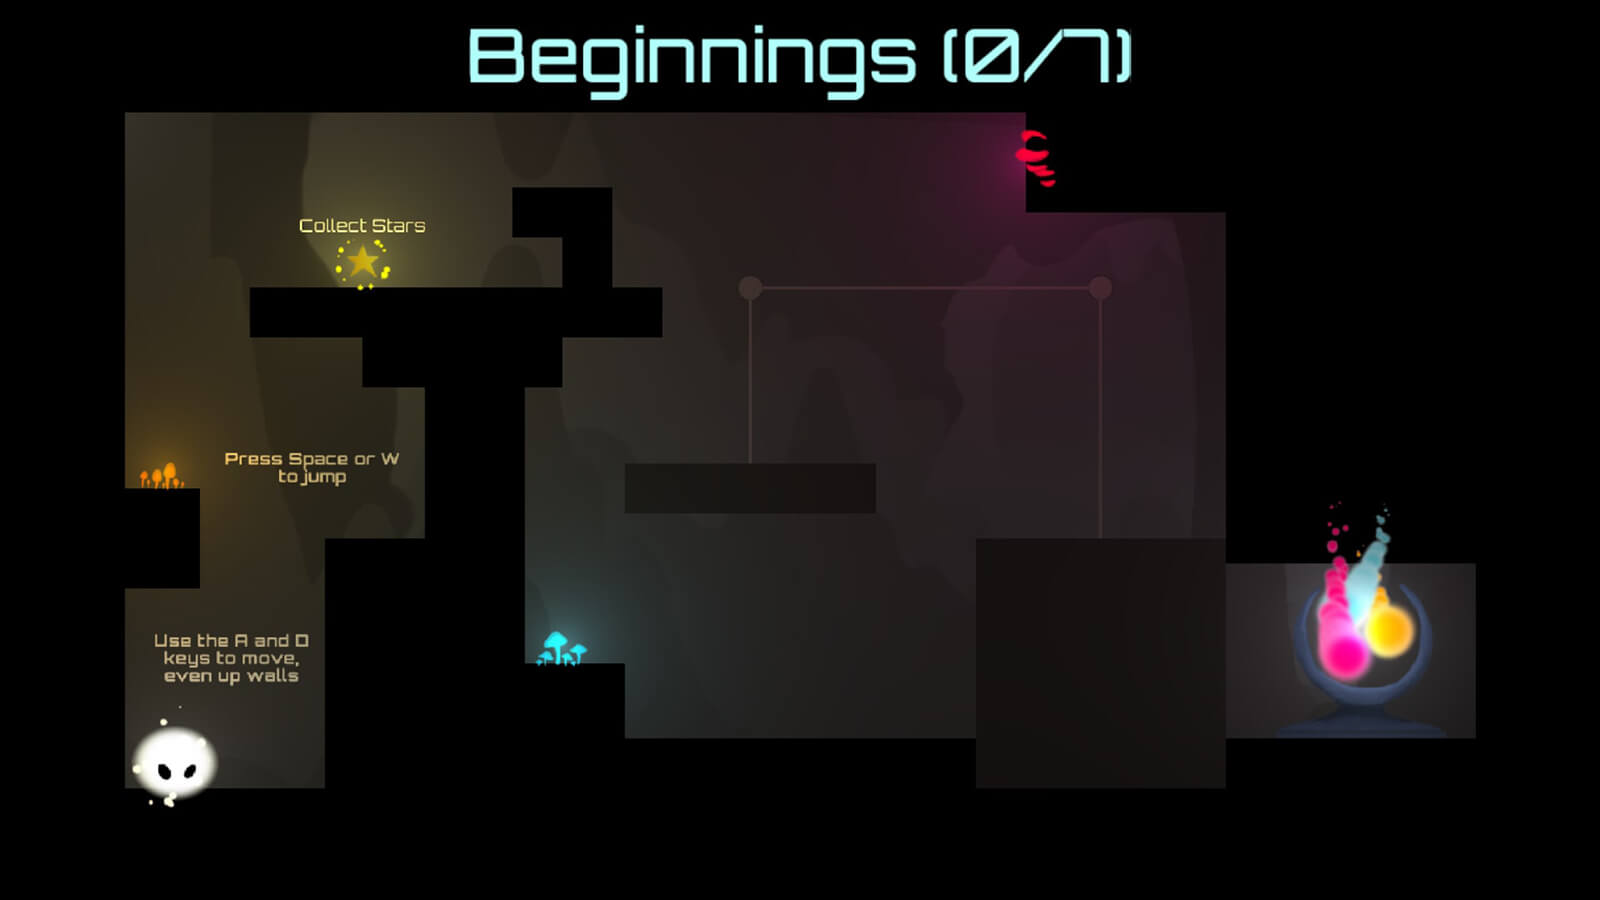 A glowing white orb stands at the start of the "Beginnings" tutorial level, with descriptions explaining player controls.